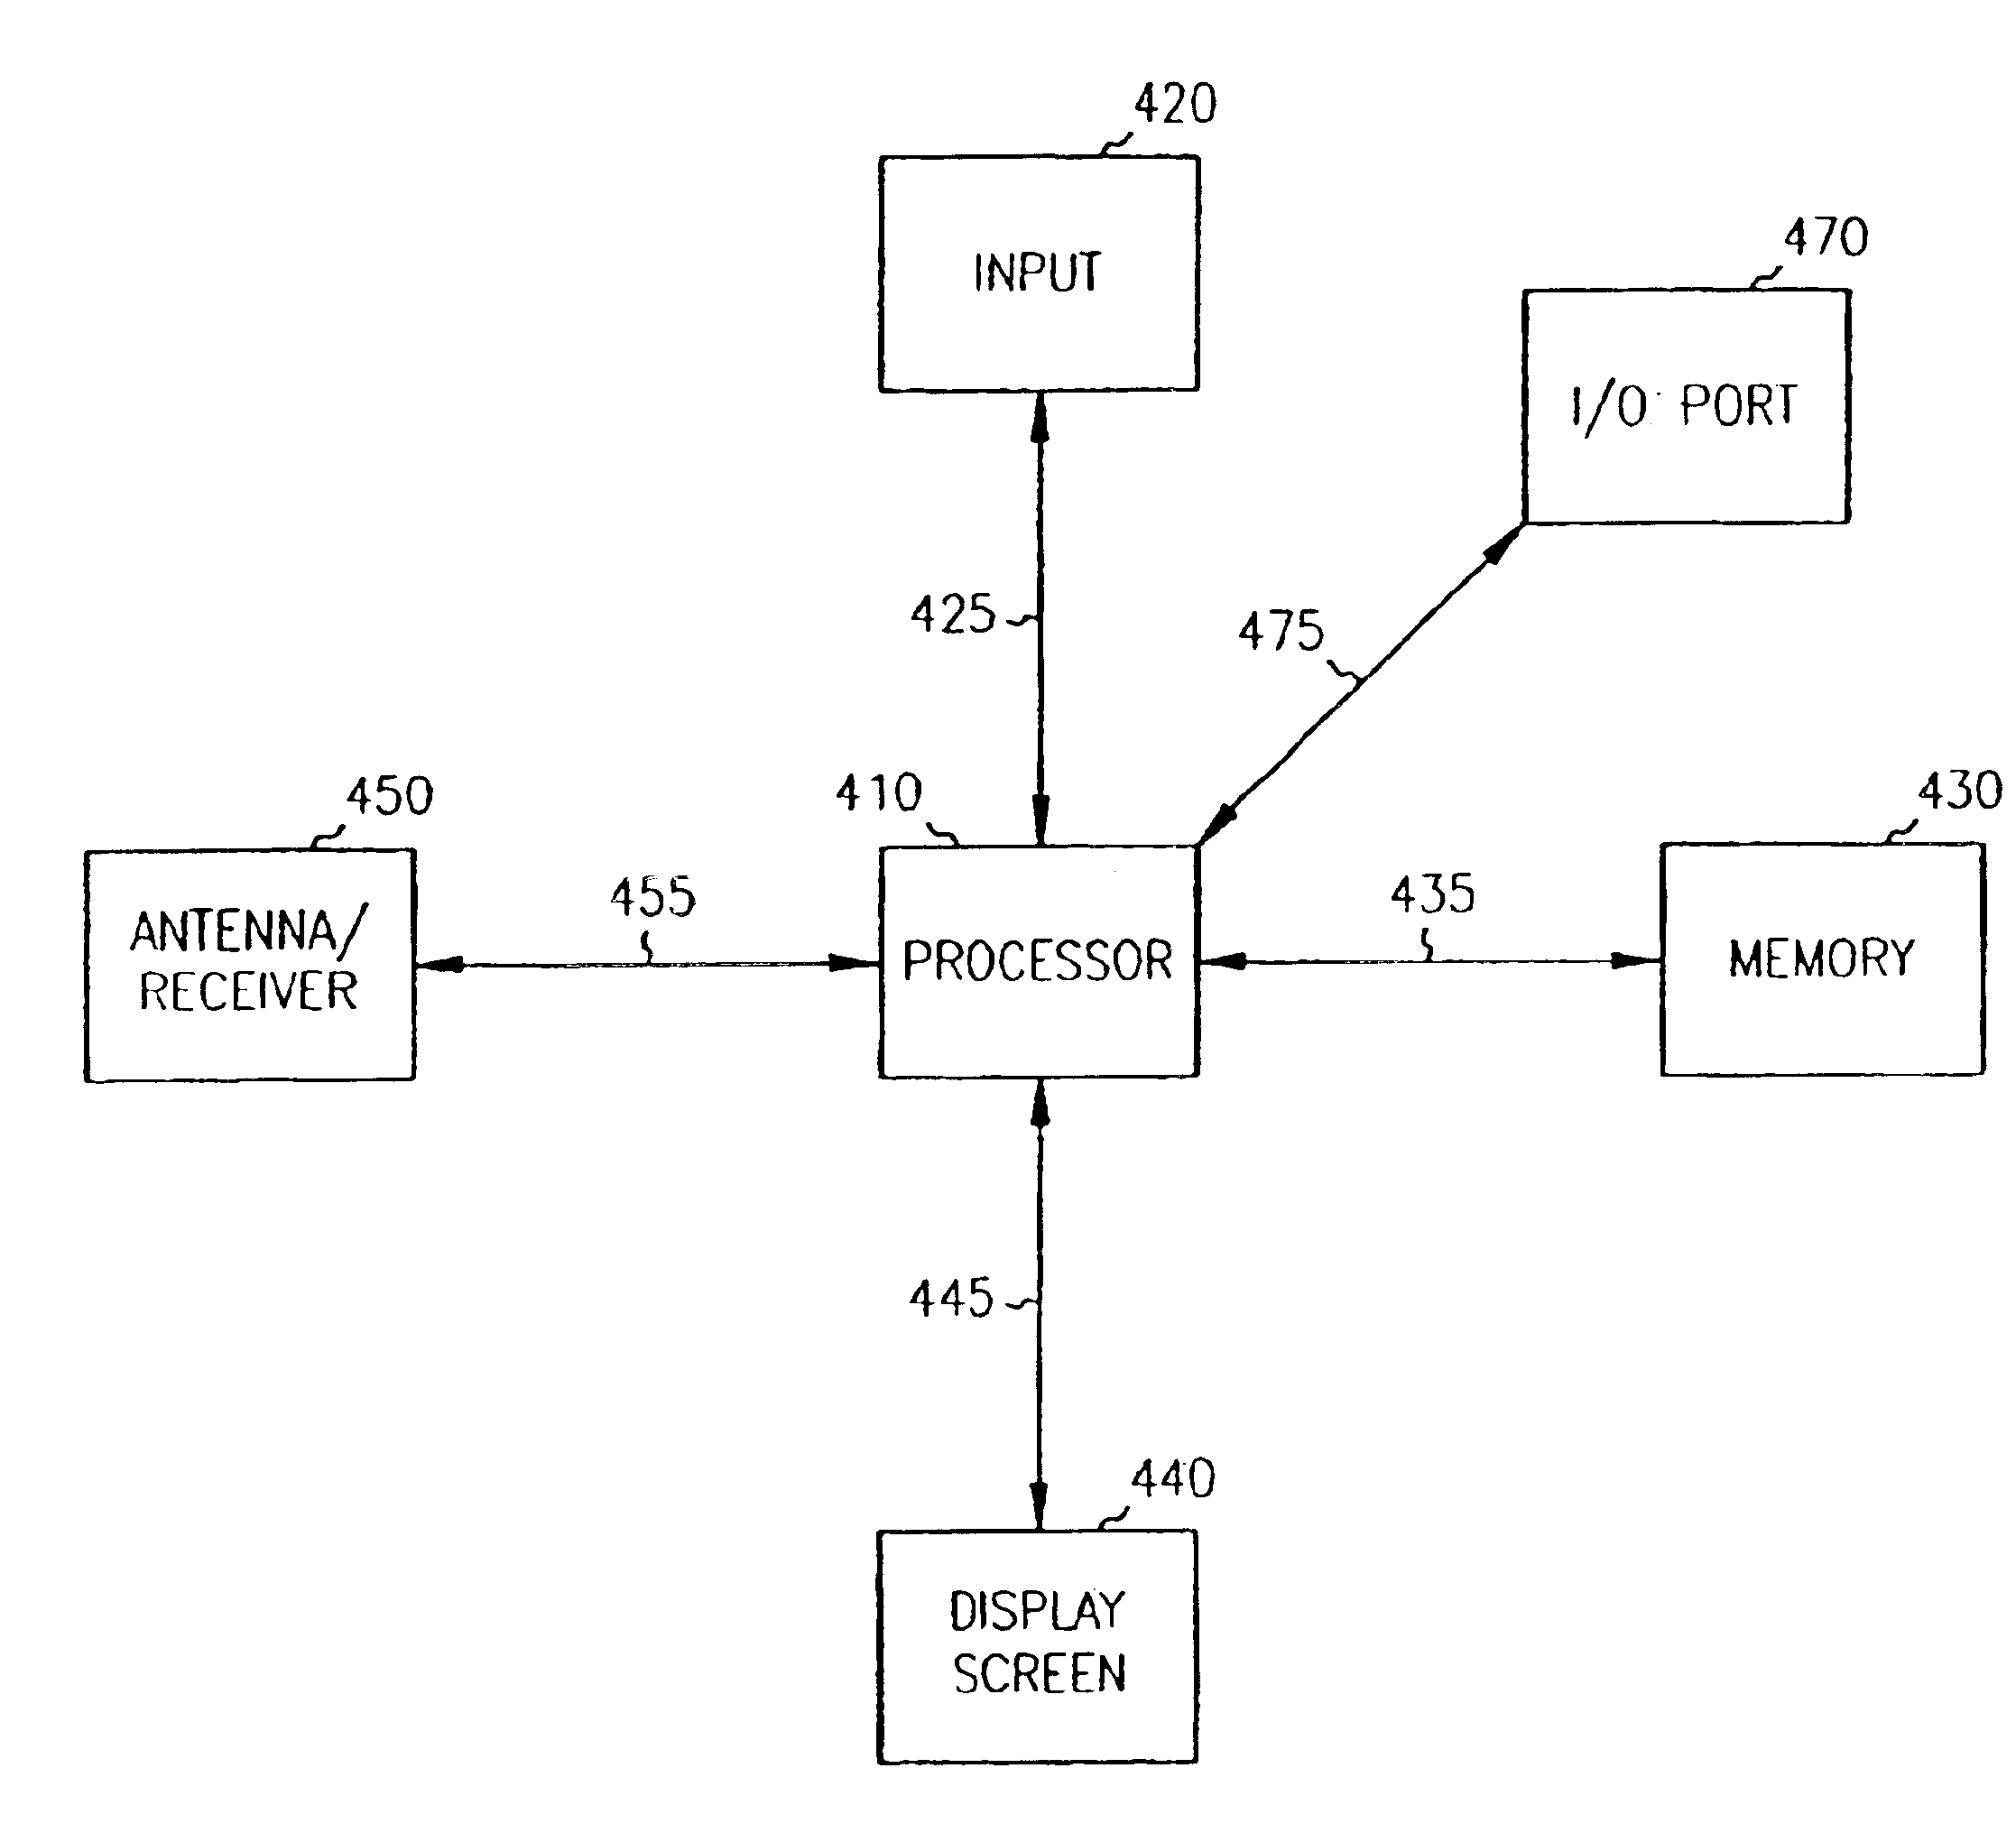 Systems, functional data, and methods for generating a route